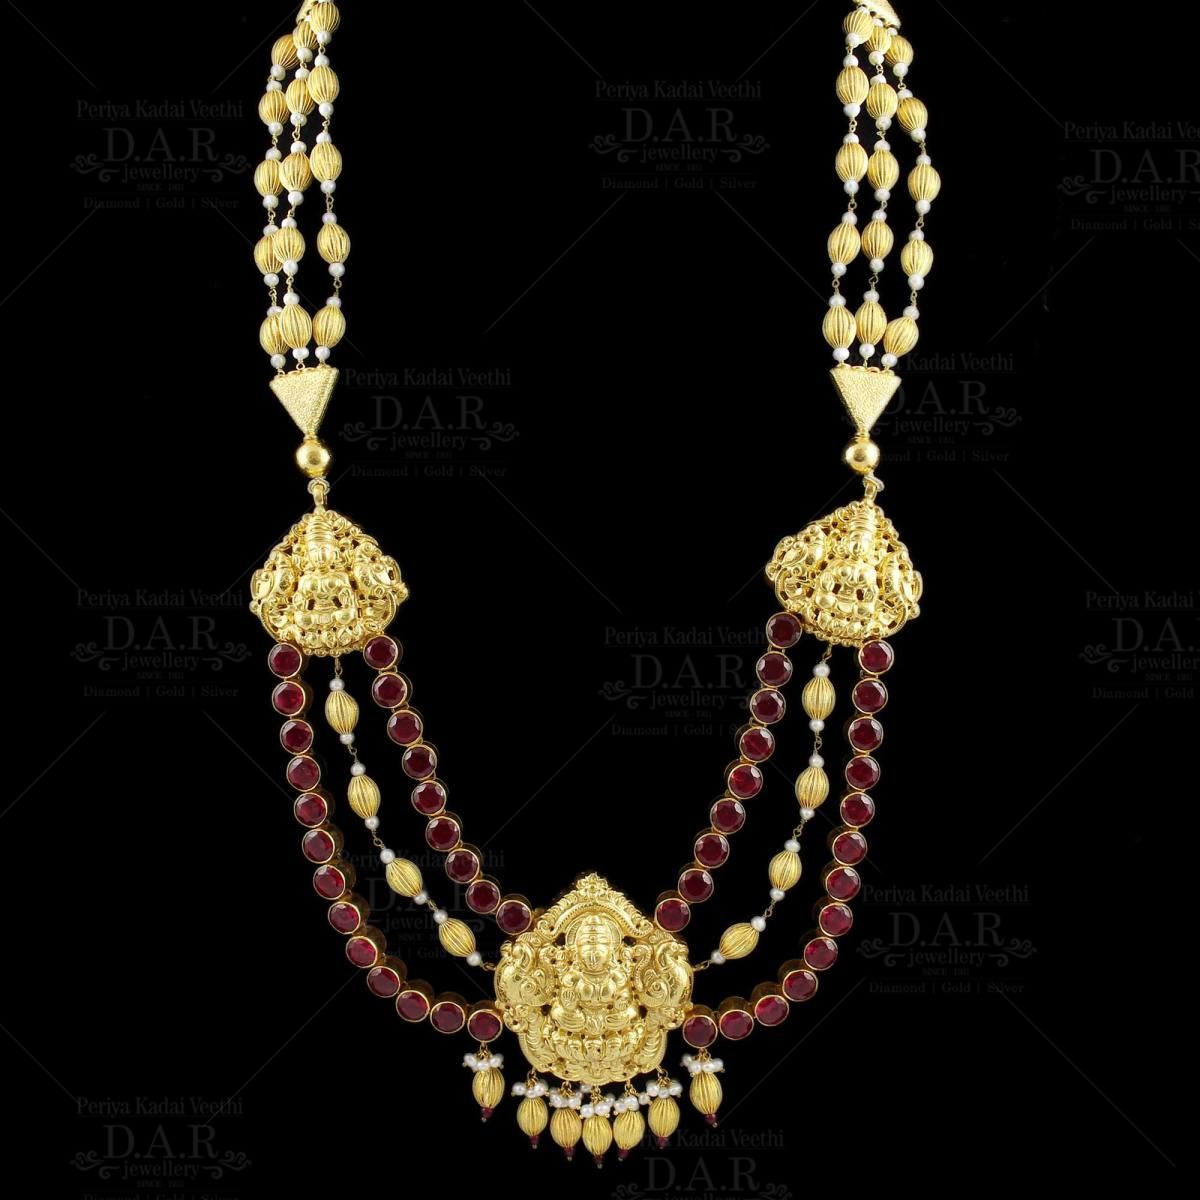 22K Gold 'Lakshmi' Necklace with Beads & Pearls (Temple Jewellery